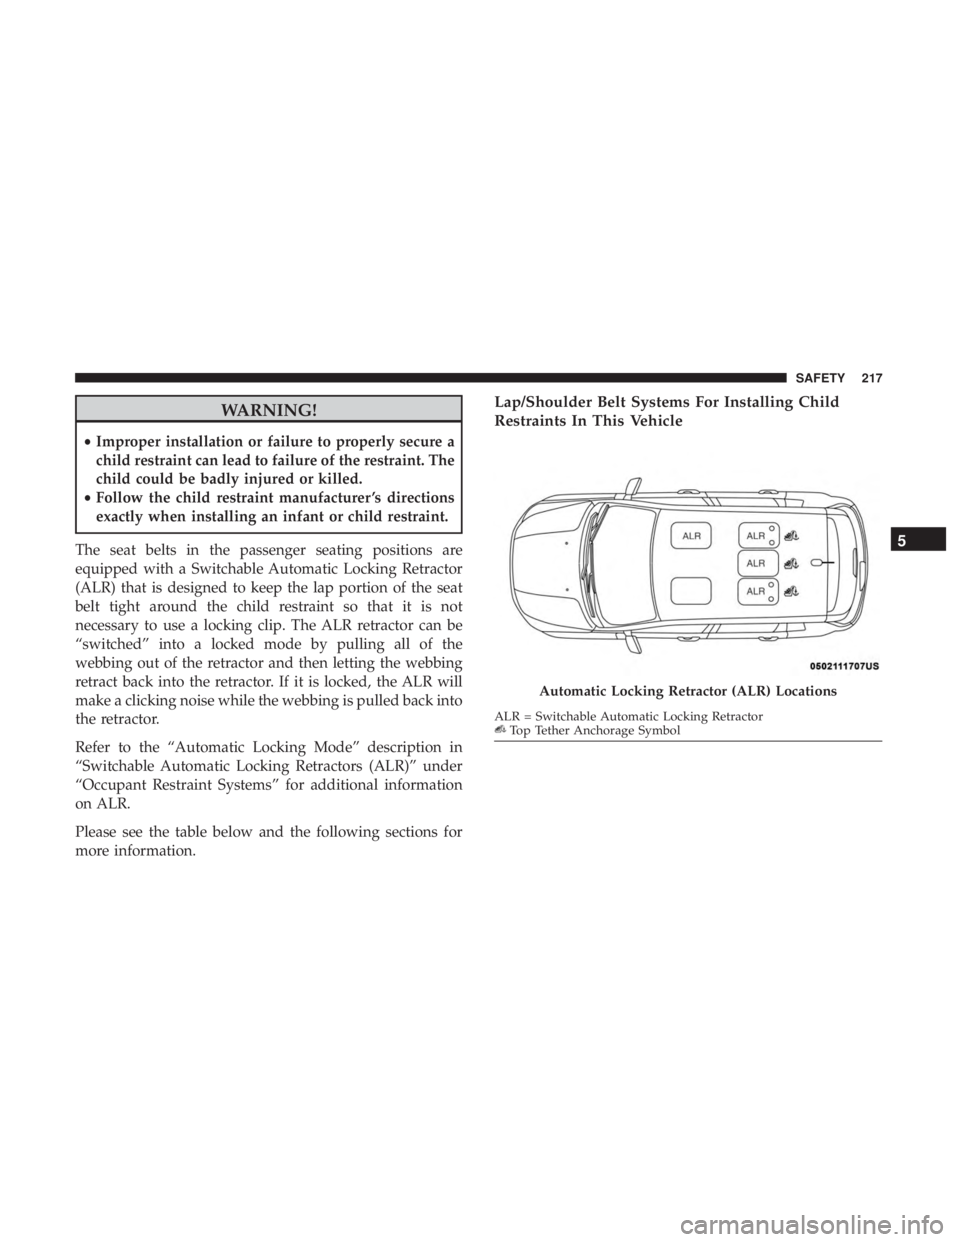 JEEP COMPASS TRAILHAWK 2018  Owners Manual WARNING!
•Improper installation or failure to properly secure a
child restraint can lead to failure of the restraint. The
child could be badly injured or killed.
• Follow the child restraint manuf